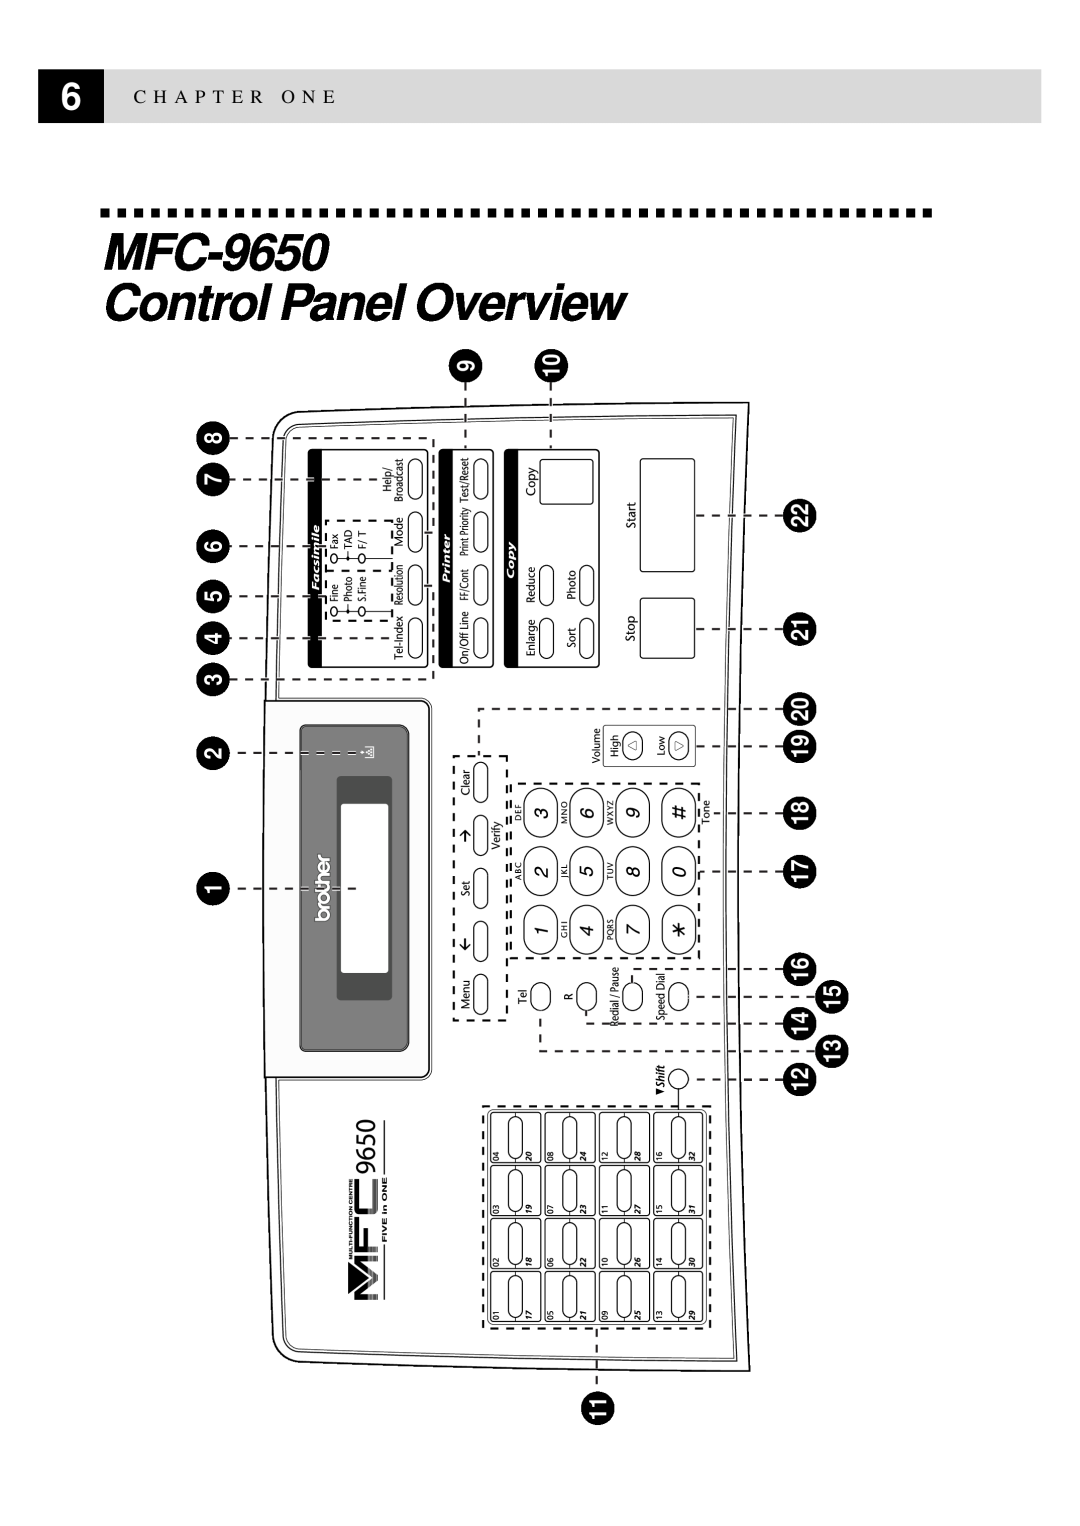 Brother FAX-8350P MFC-9650 Control Panel Overview, 12 14 16 17 18 19 20 21 13, C H A P T E R O N E, 12 3 4 5 6 7 